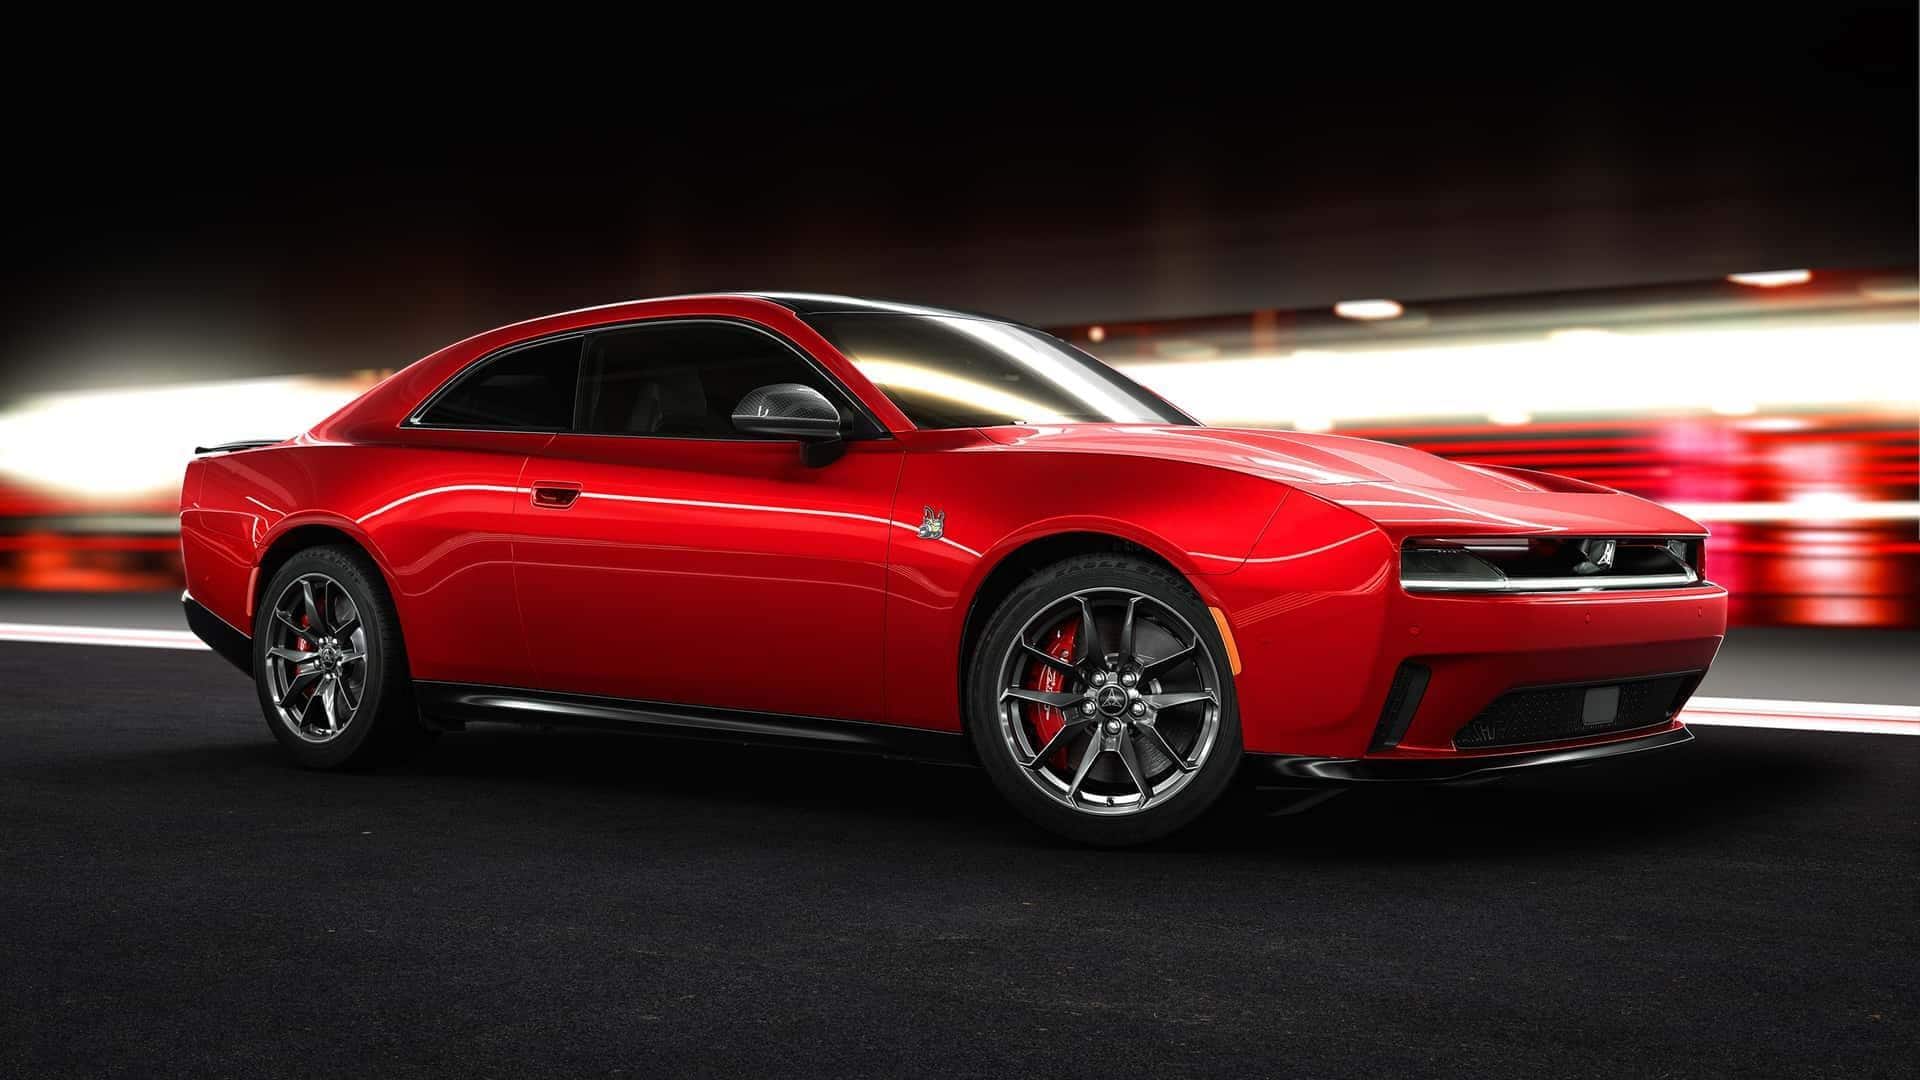 Charger Daytona breaks cover as Dodge's first all-electric performance car